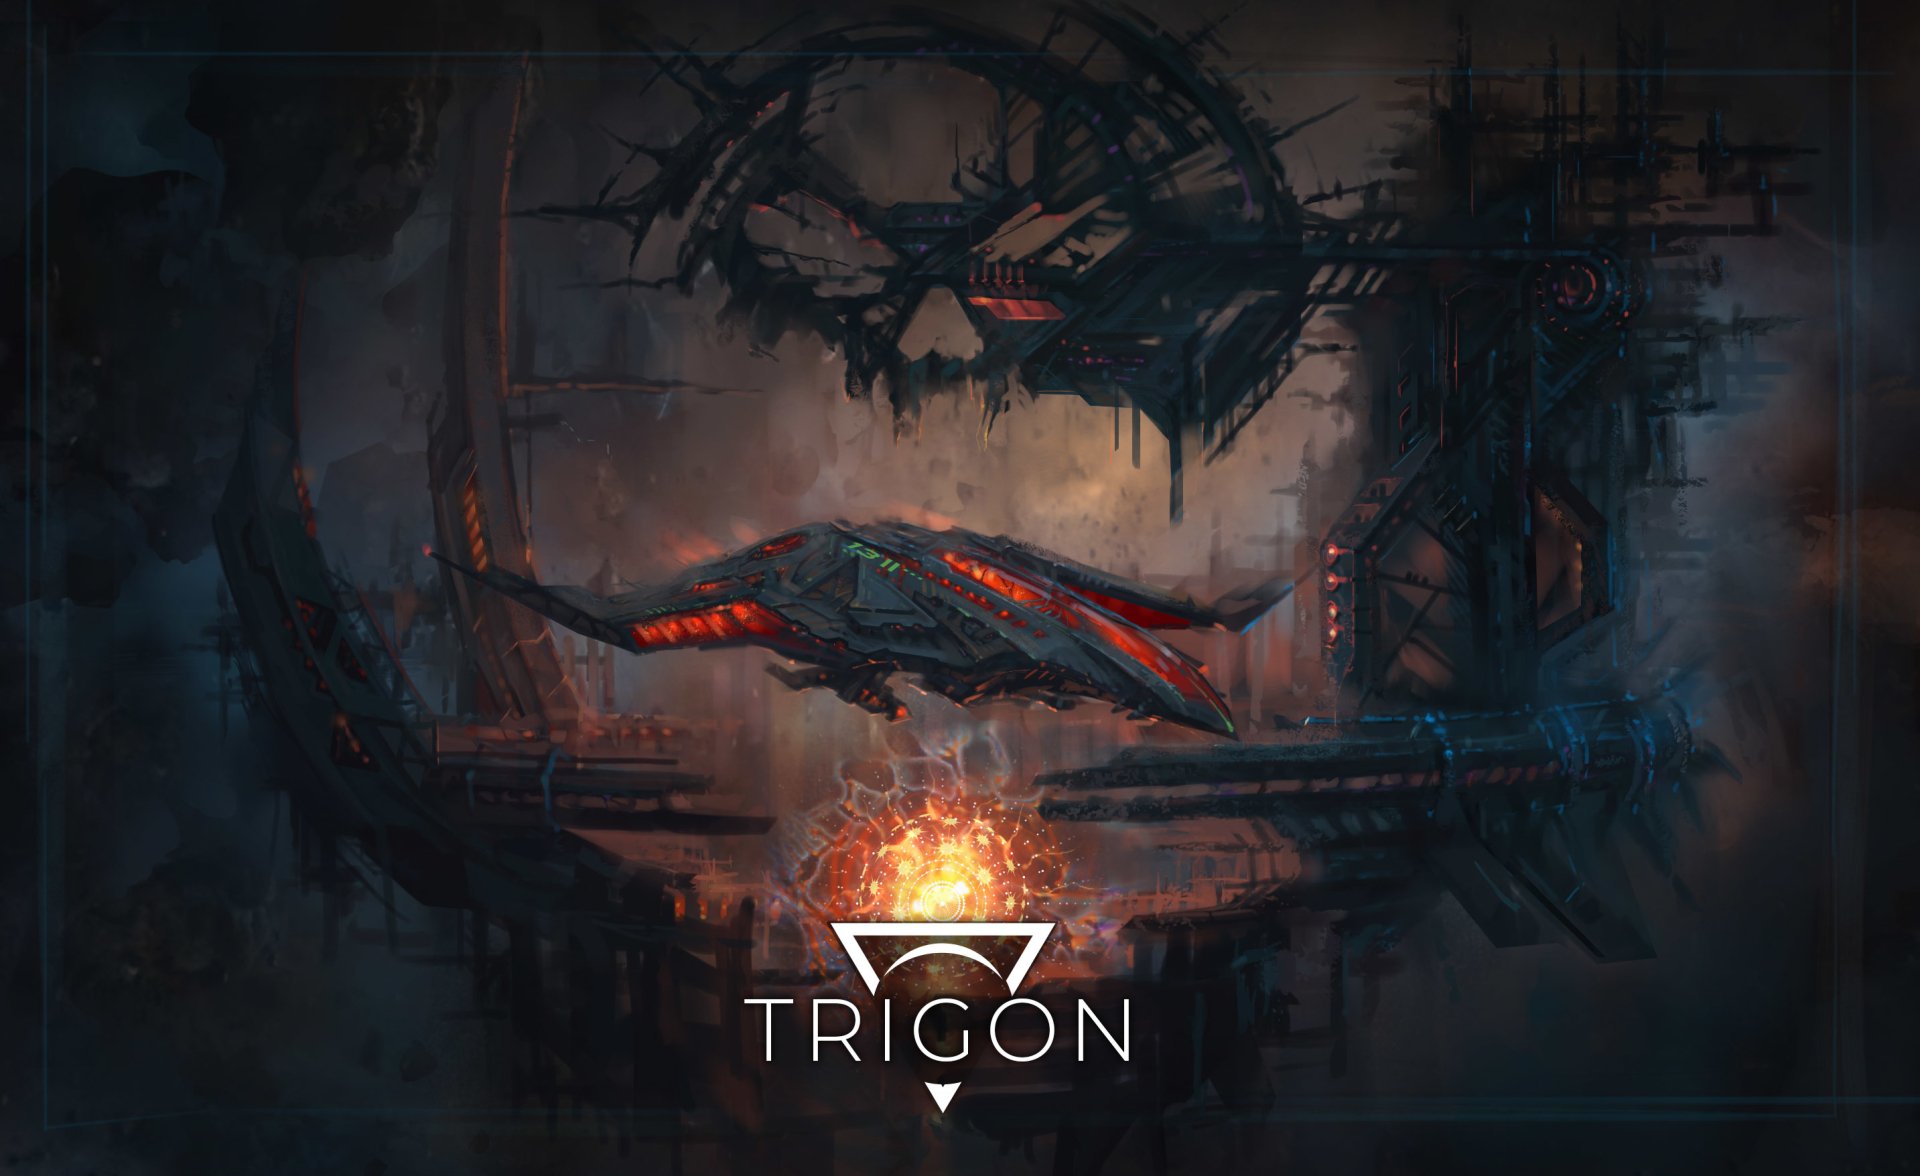 Trigon: Space Story for iphone download